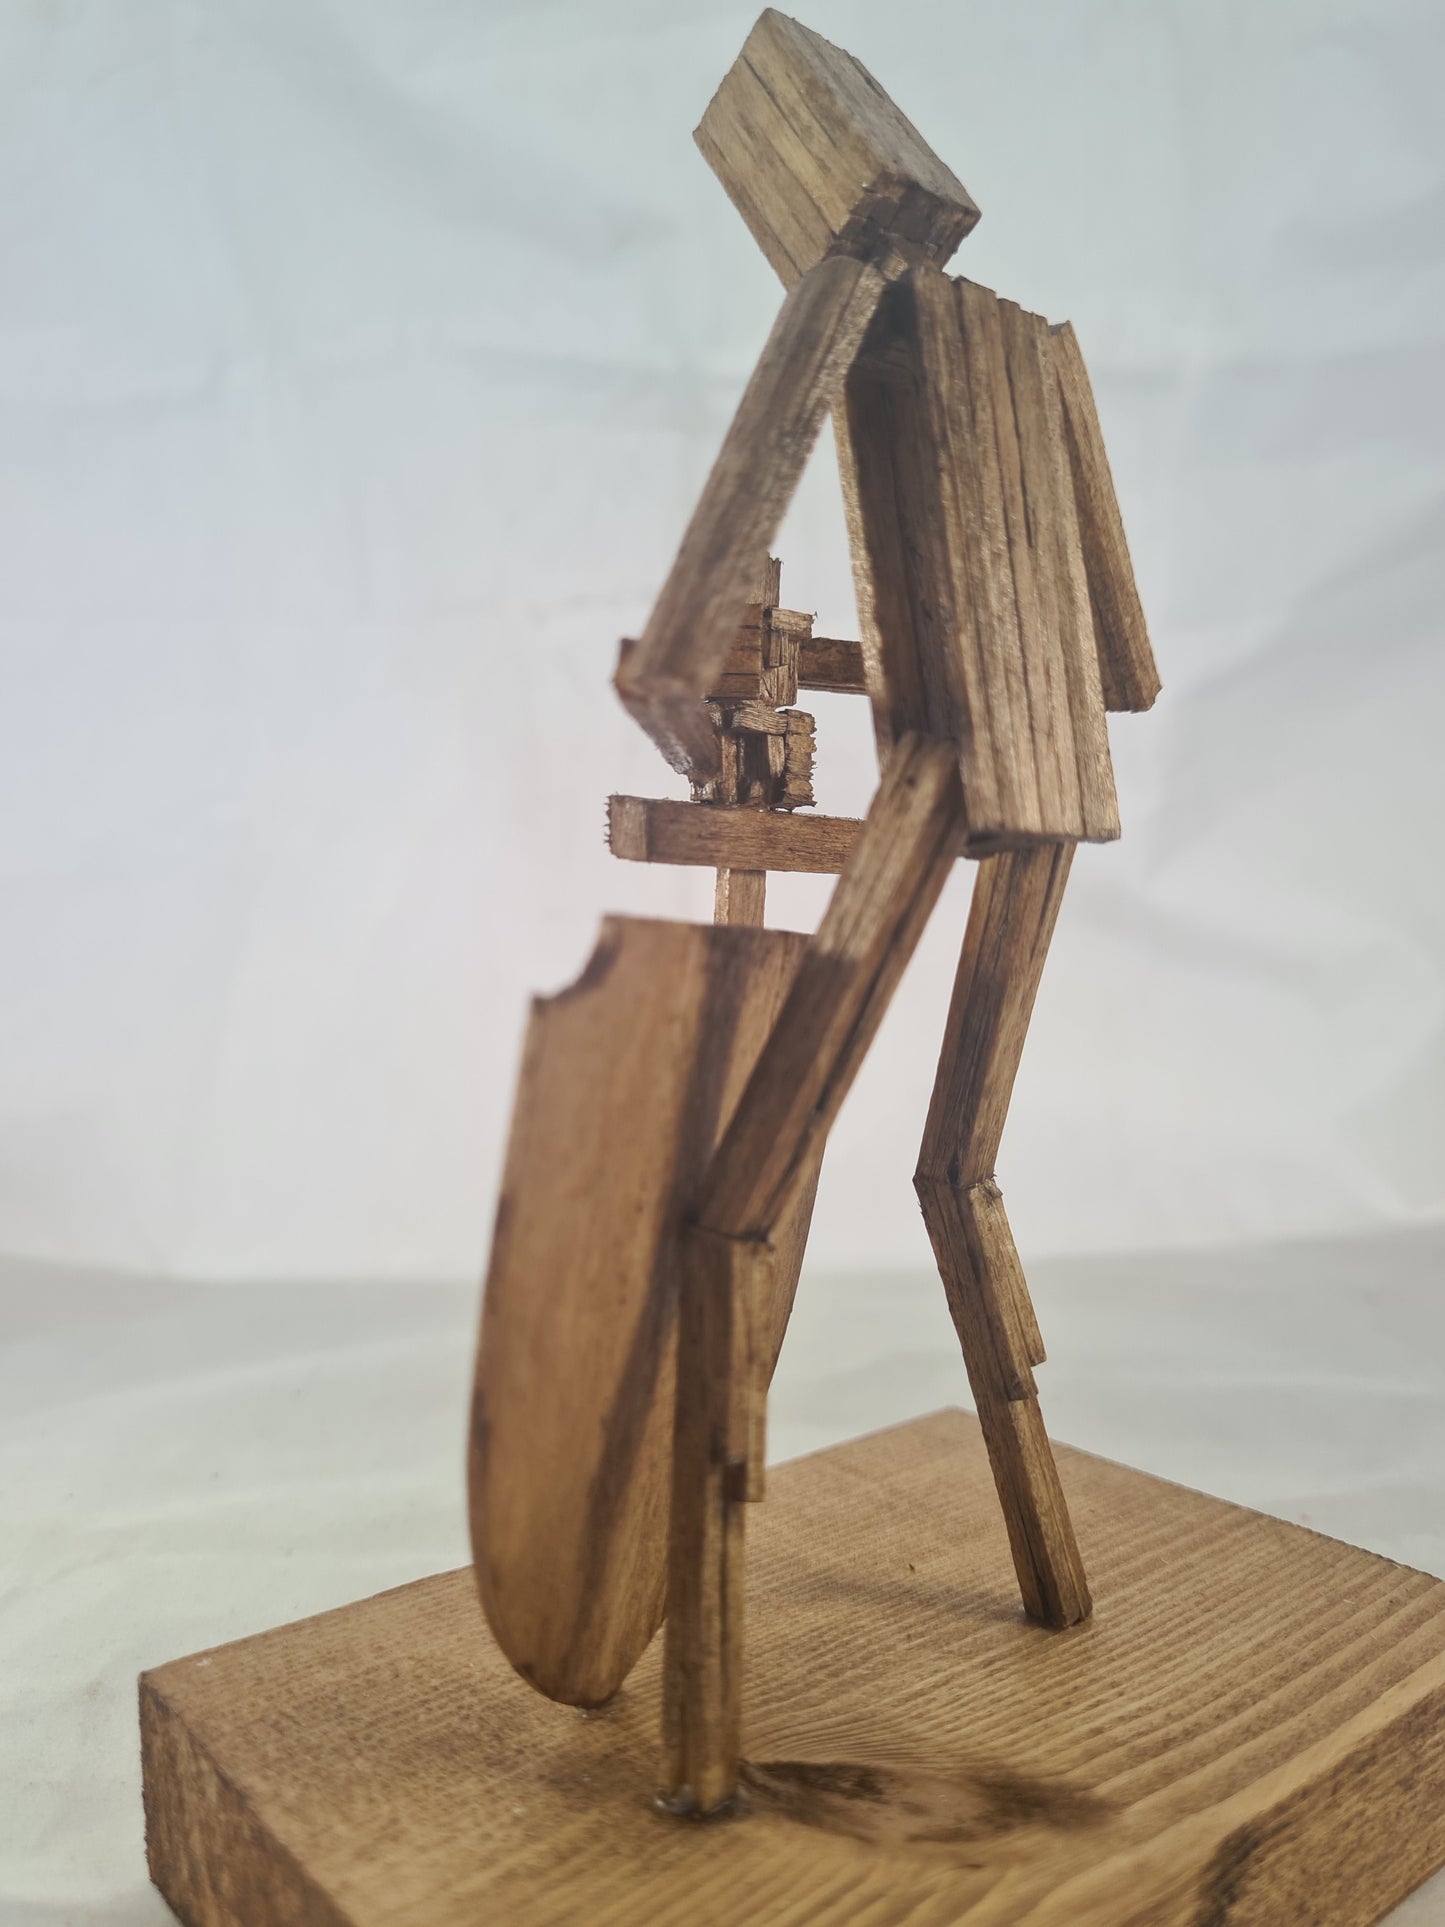 Knights Time - Handcrafted Wooden Matchstick Figures - Gifts, Ornaments and Decor By Tiggidy Designs